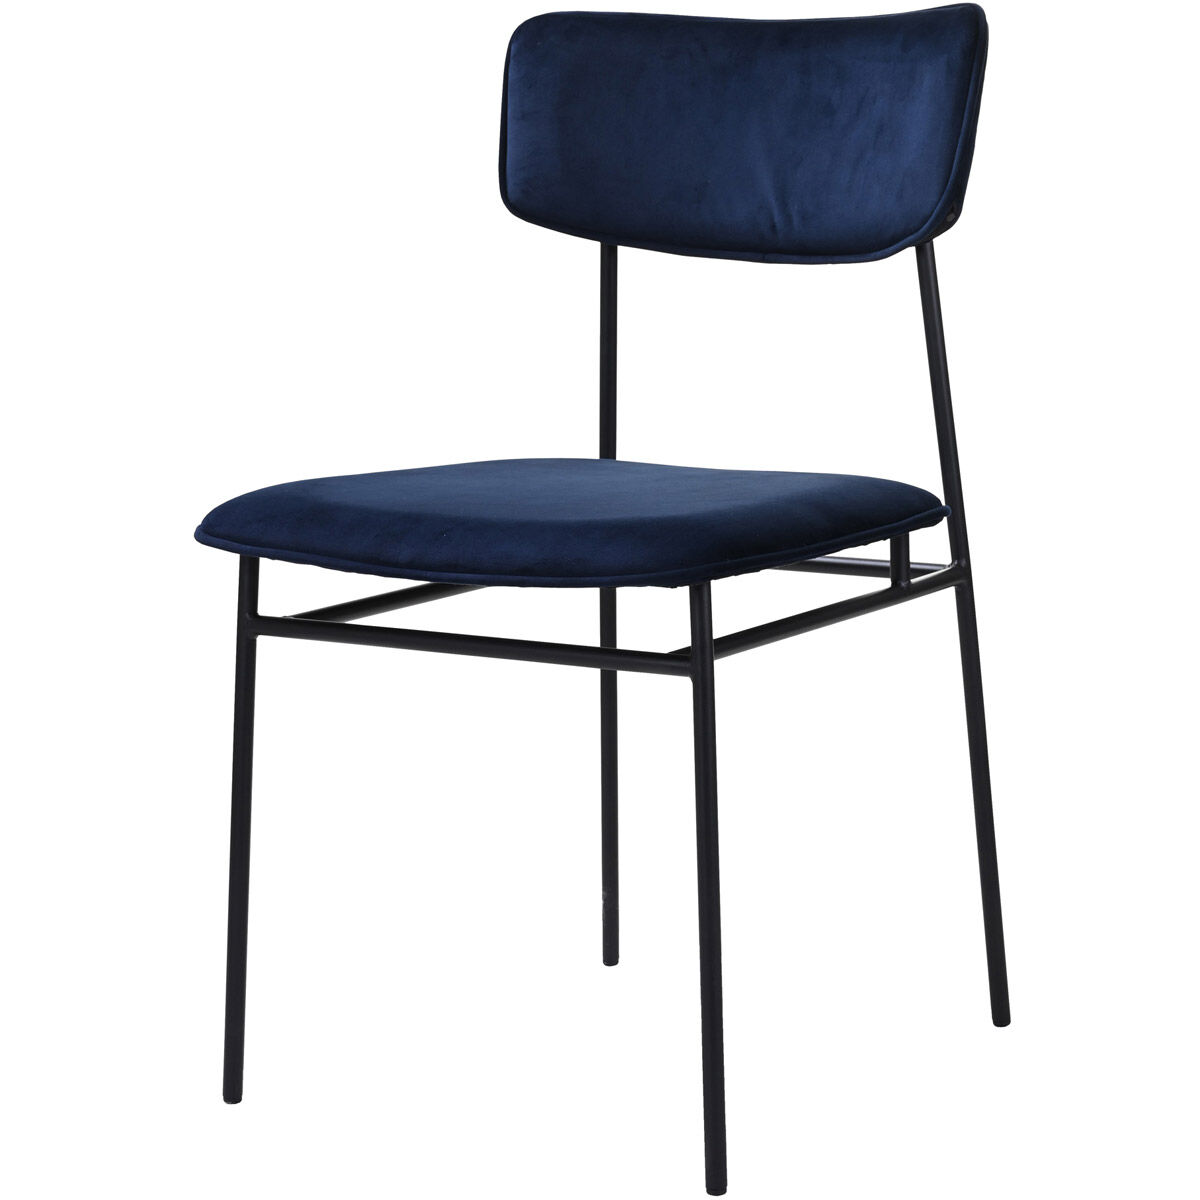 Moe's Home Collection EQ-1016-26 Sailor Blue Dining Chair, Set of 2